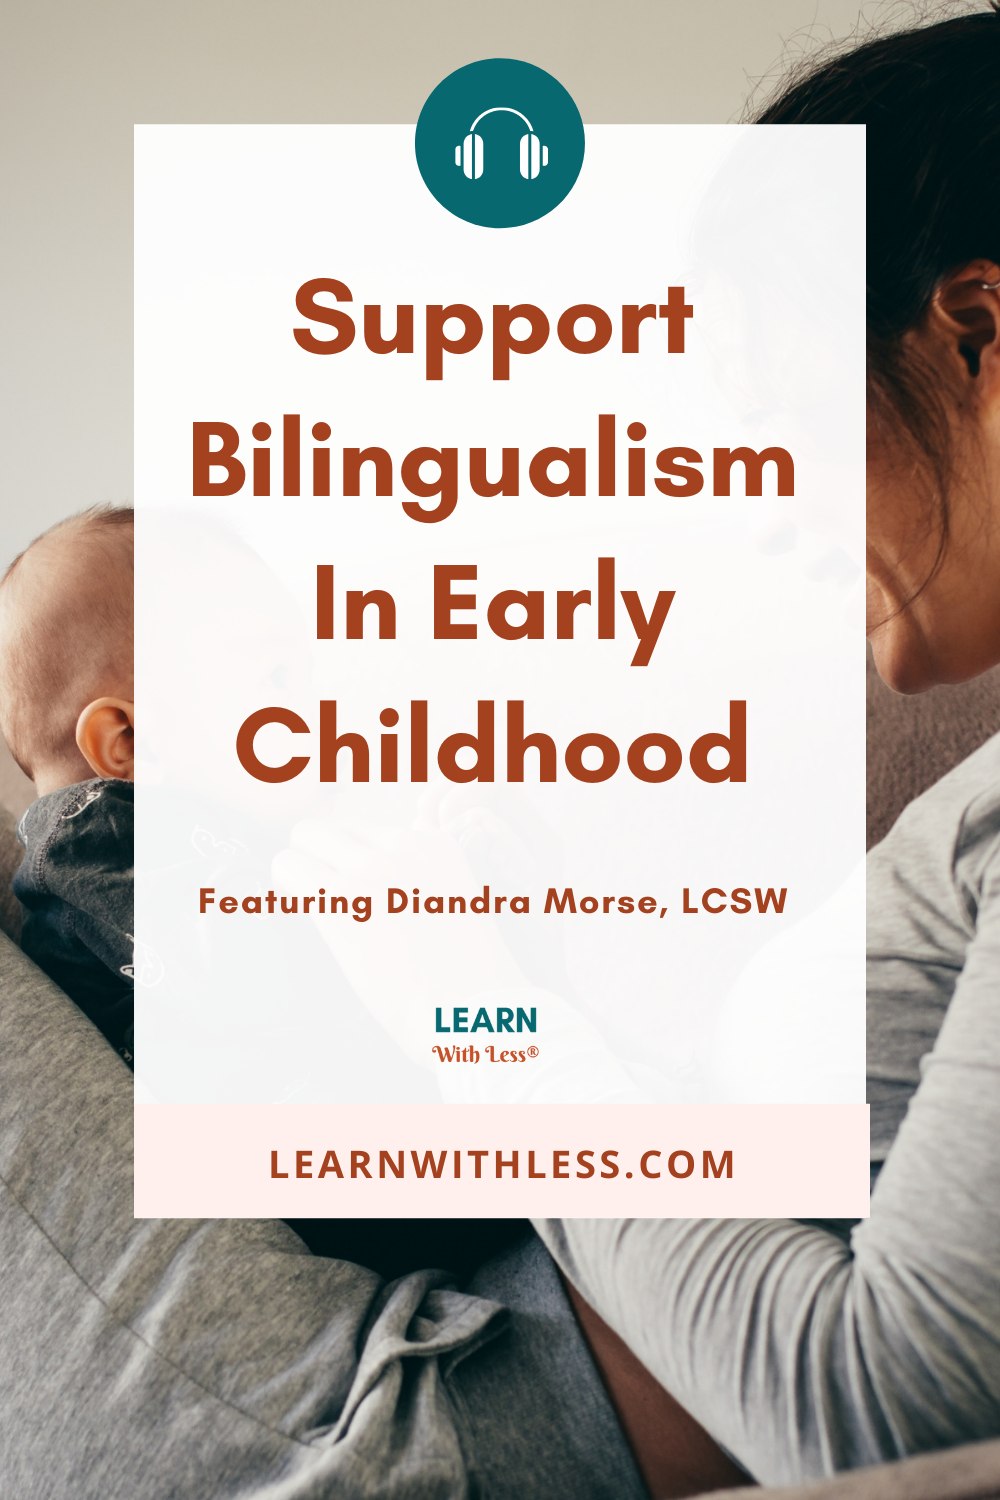 How This Bilingual Parent Supports Bilingualism in Early Childhood, with Diandra Morse, LCSW